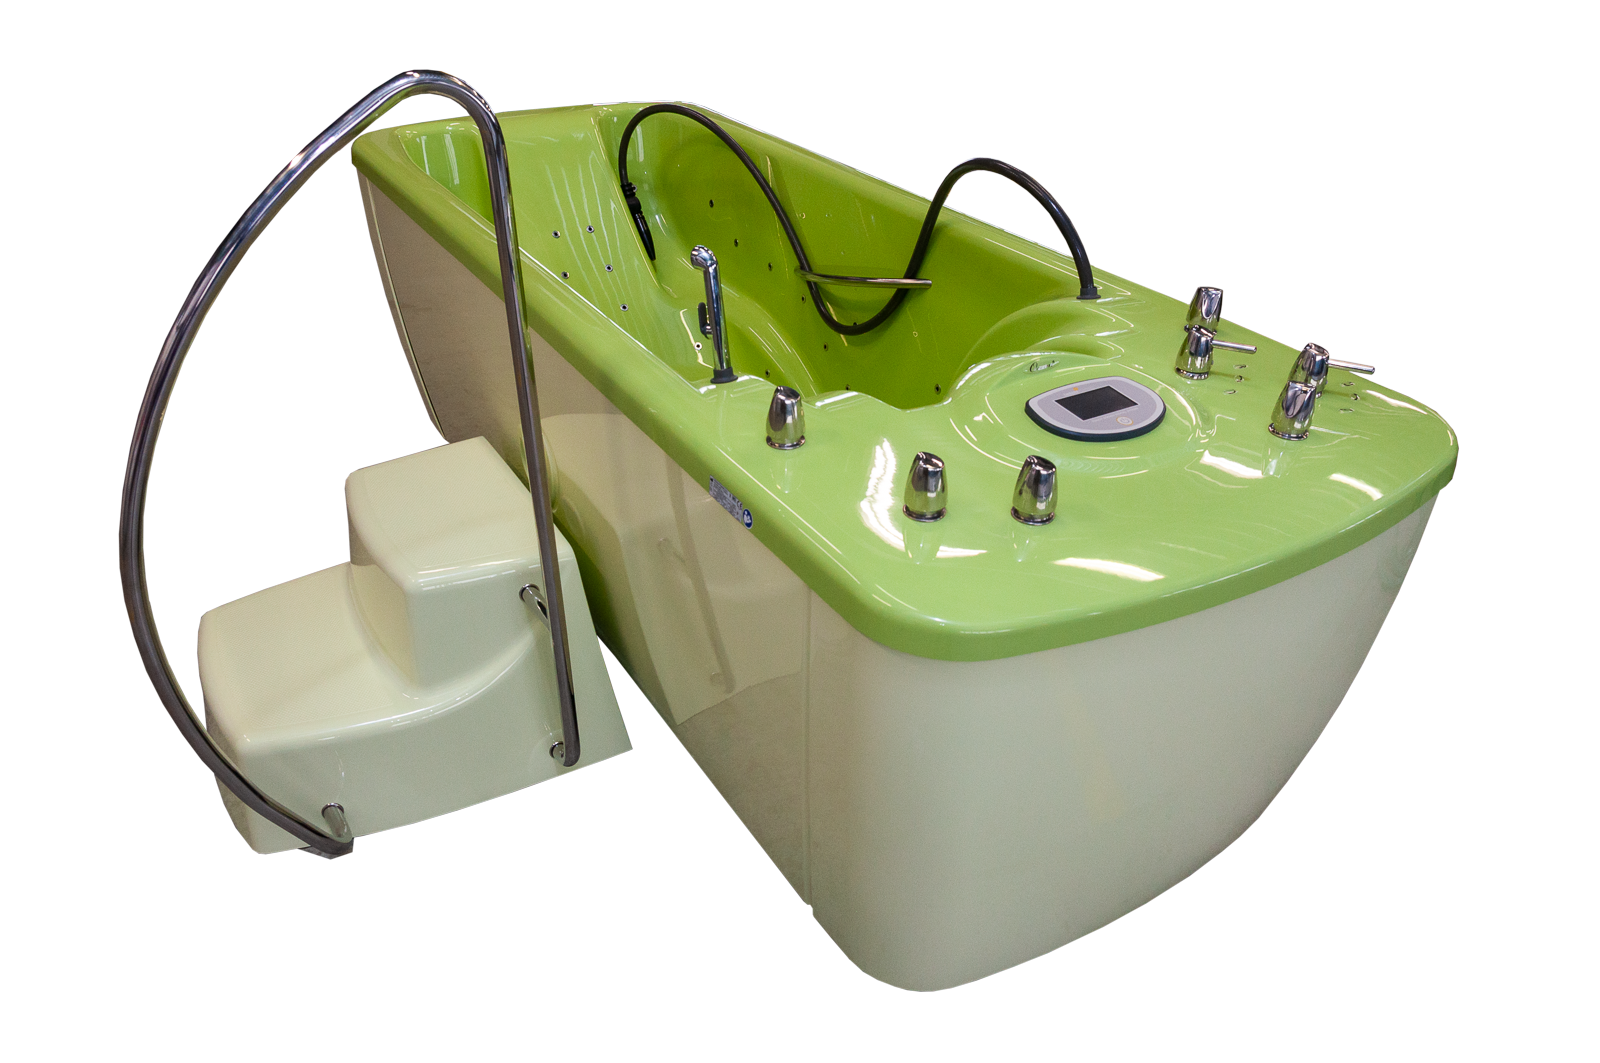 A computer controlled hydromassage bath tub with intelligent and automatic functions. Easily operated via a large touchscreen. It is equipped with a powerfull and efficient massage system and several massage zones. Thanks to its size, it is also suitable for manual subaqual massage.

In its basic version it offers a wholebody hydromassage with manual controls, suitable for subaqual massage with a massage hose and and whirling baths.